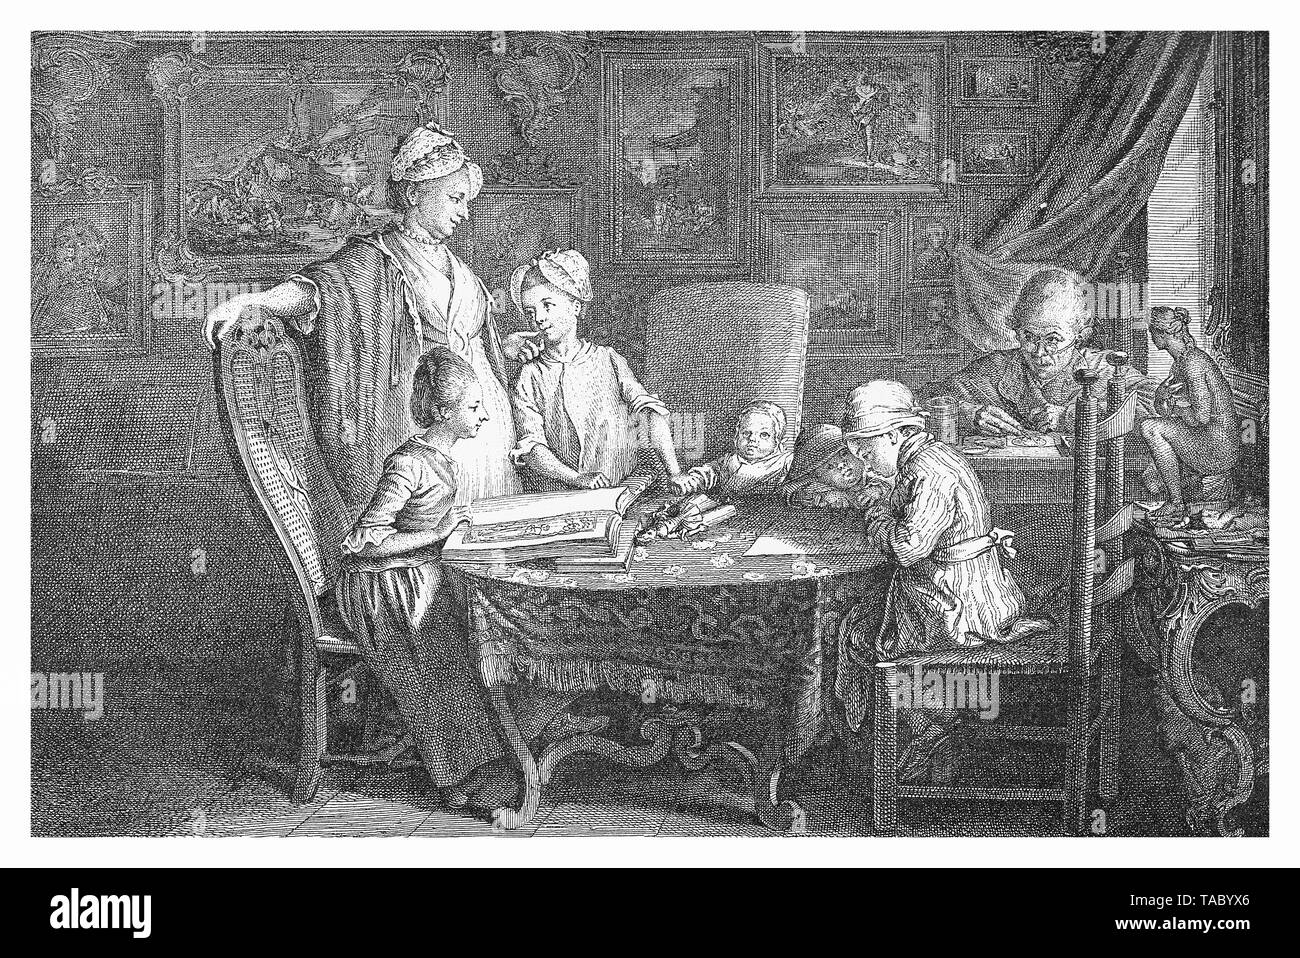 Daniel Chodowiecki (1726 - 1801) painter, printmaker, etcher and director of the Berlin Academy of Art. at home with his family Stock Photo